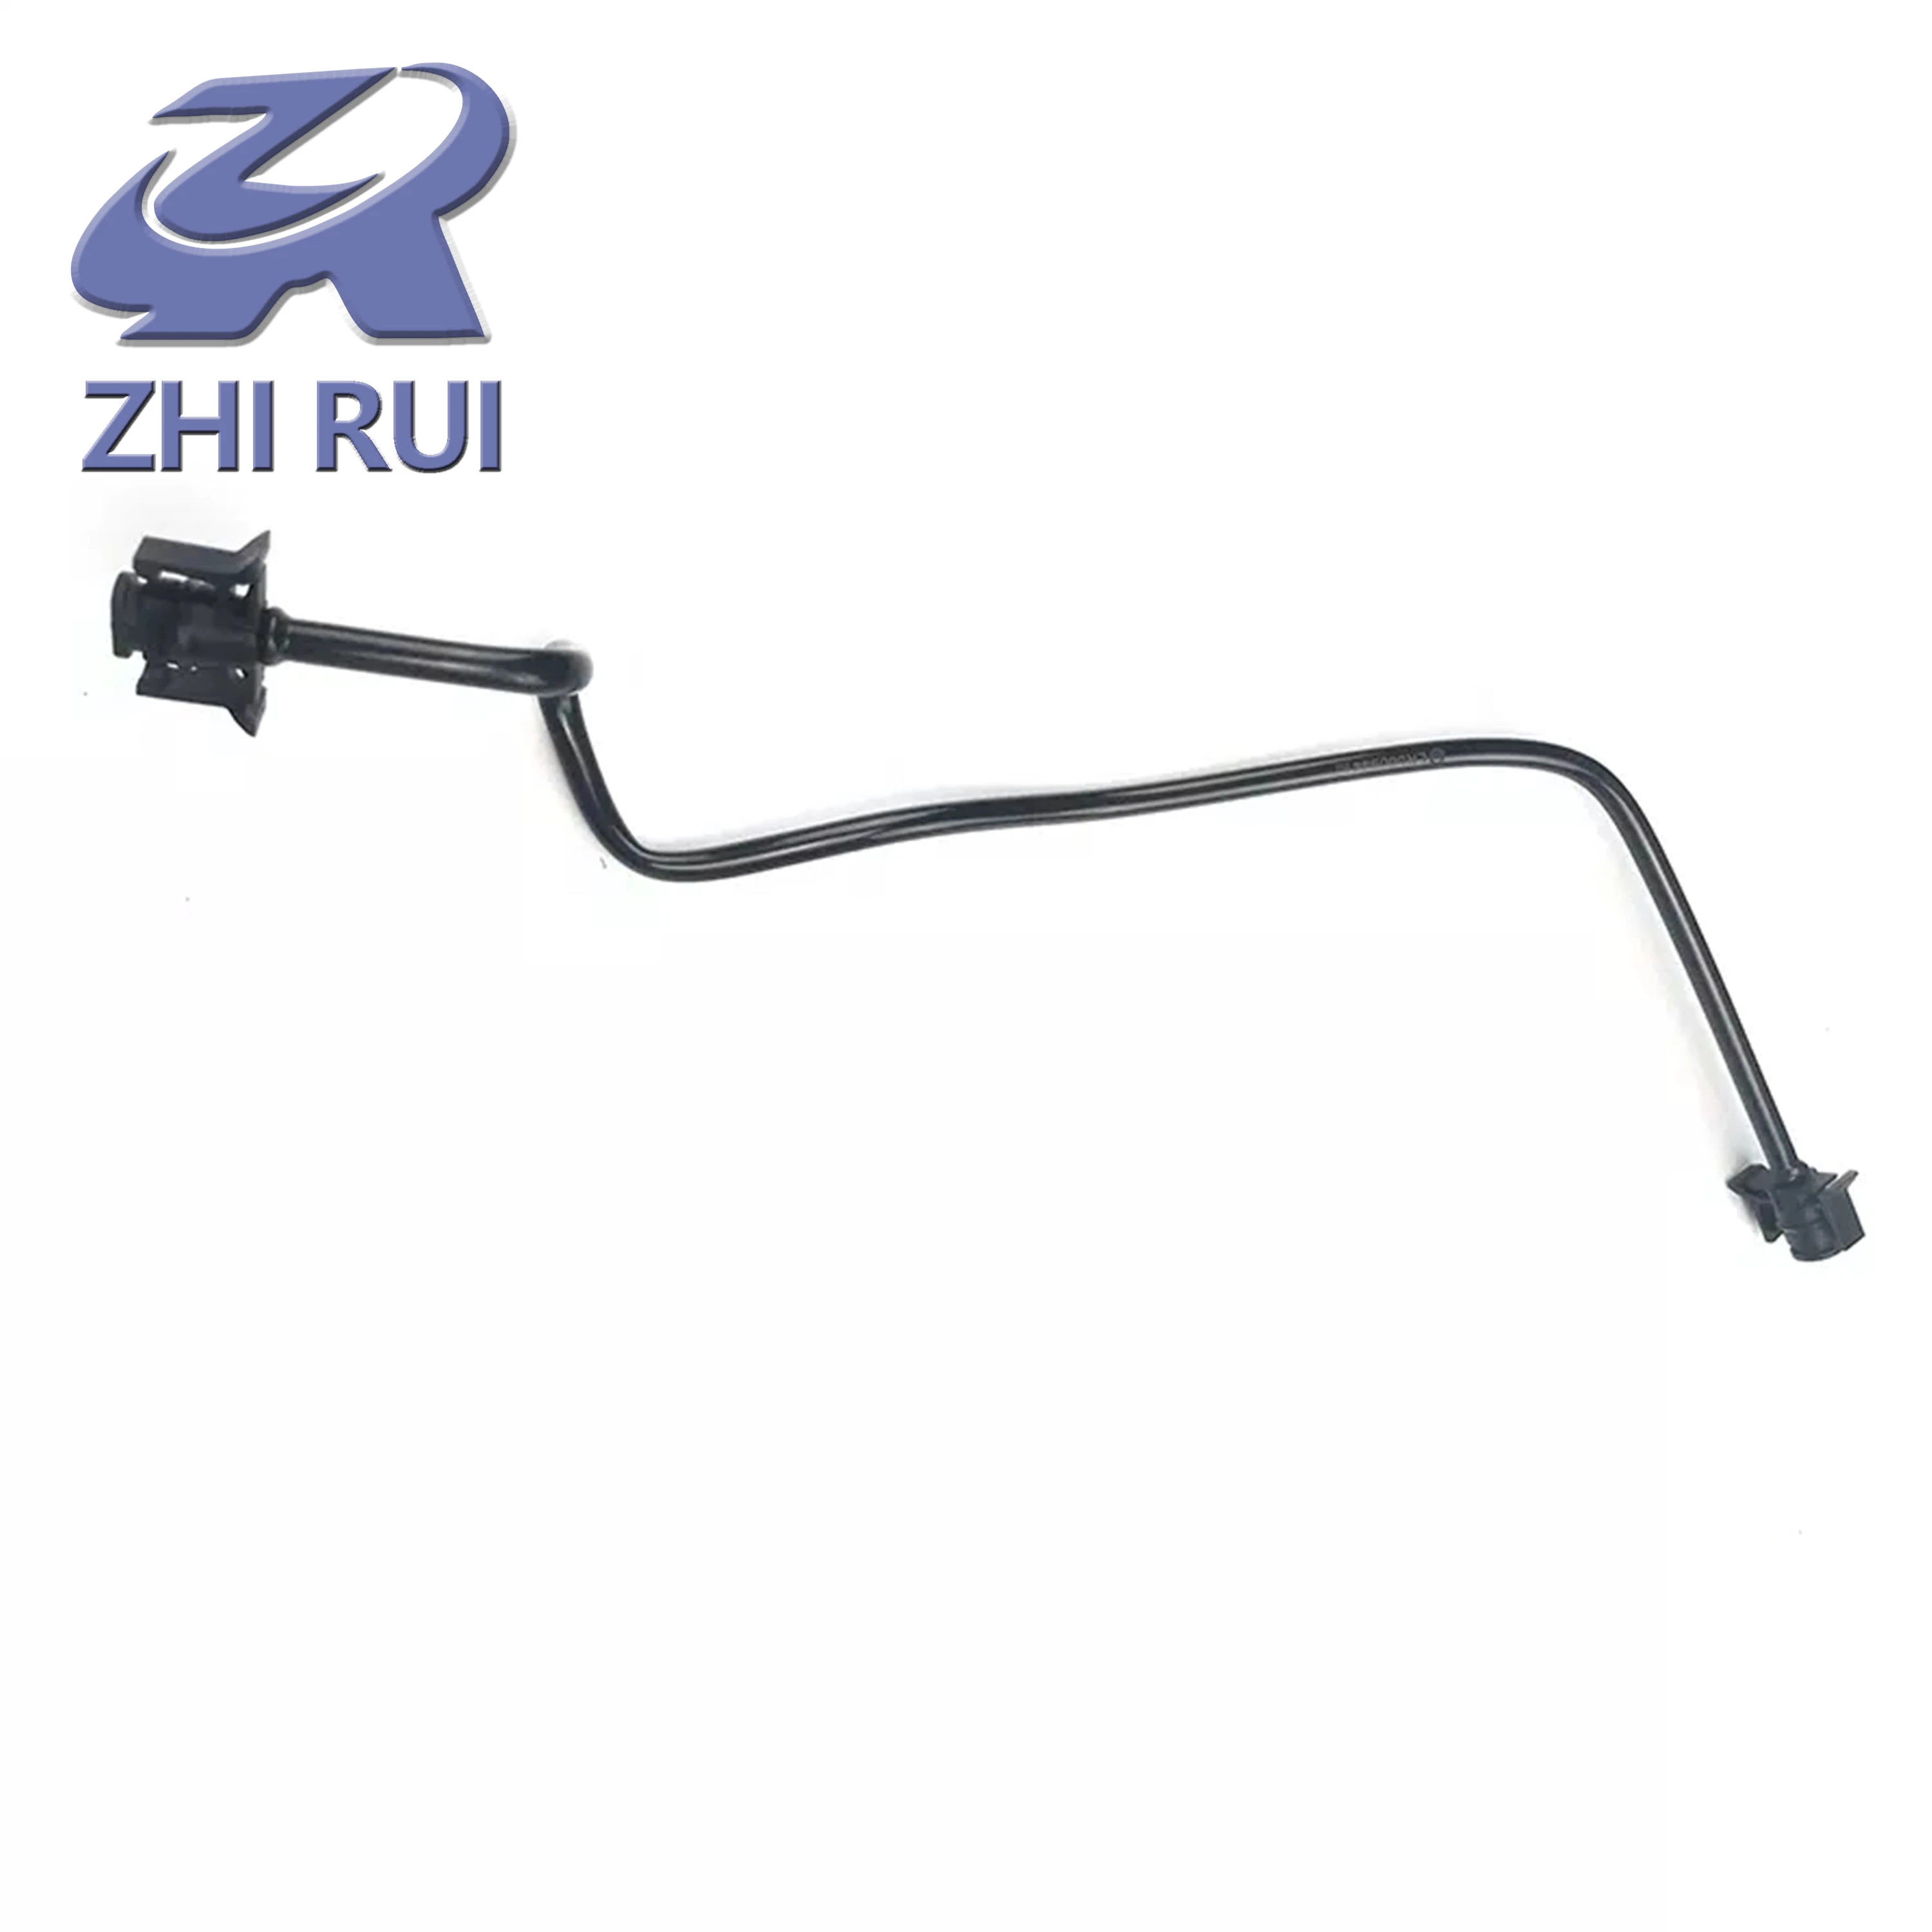 Auto Engine Radiator Coolant Hose Structure Cooling System Water Pipe for Auto Parts 2.2 Td4 2.2t SD4 Hse OEM Lr000944